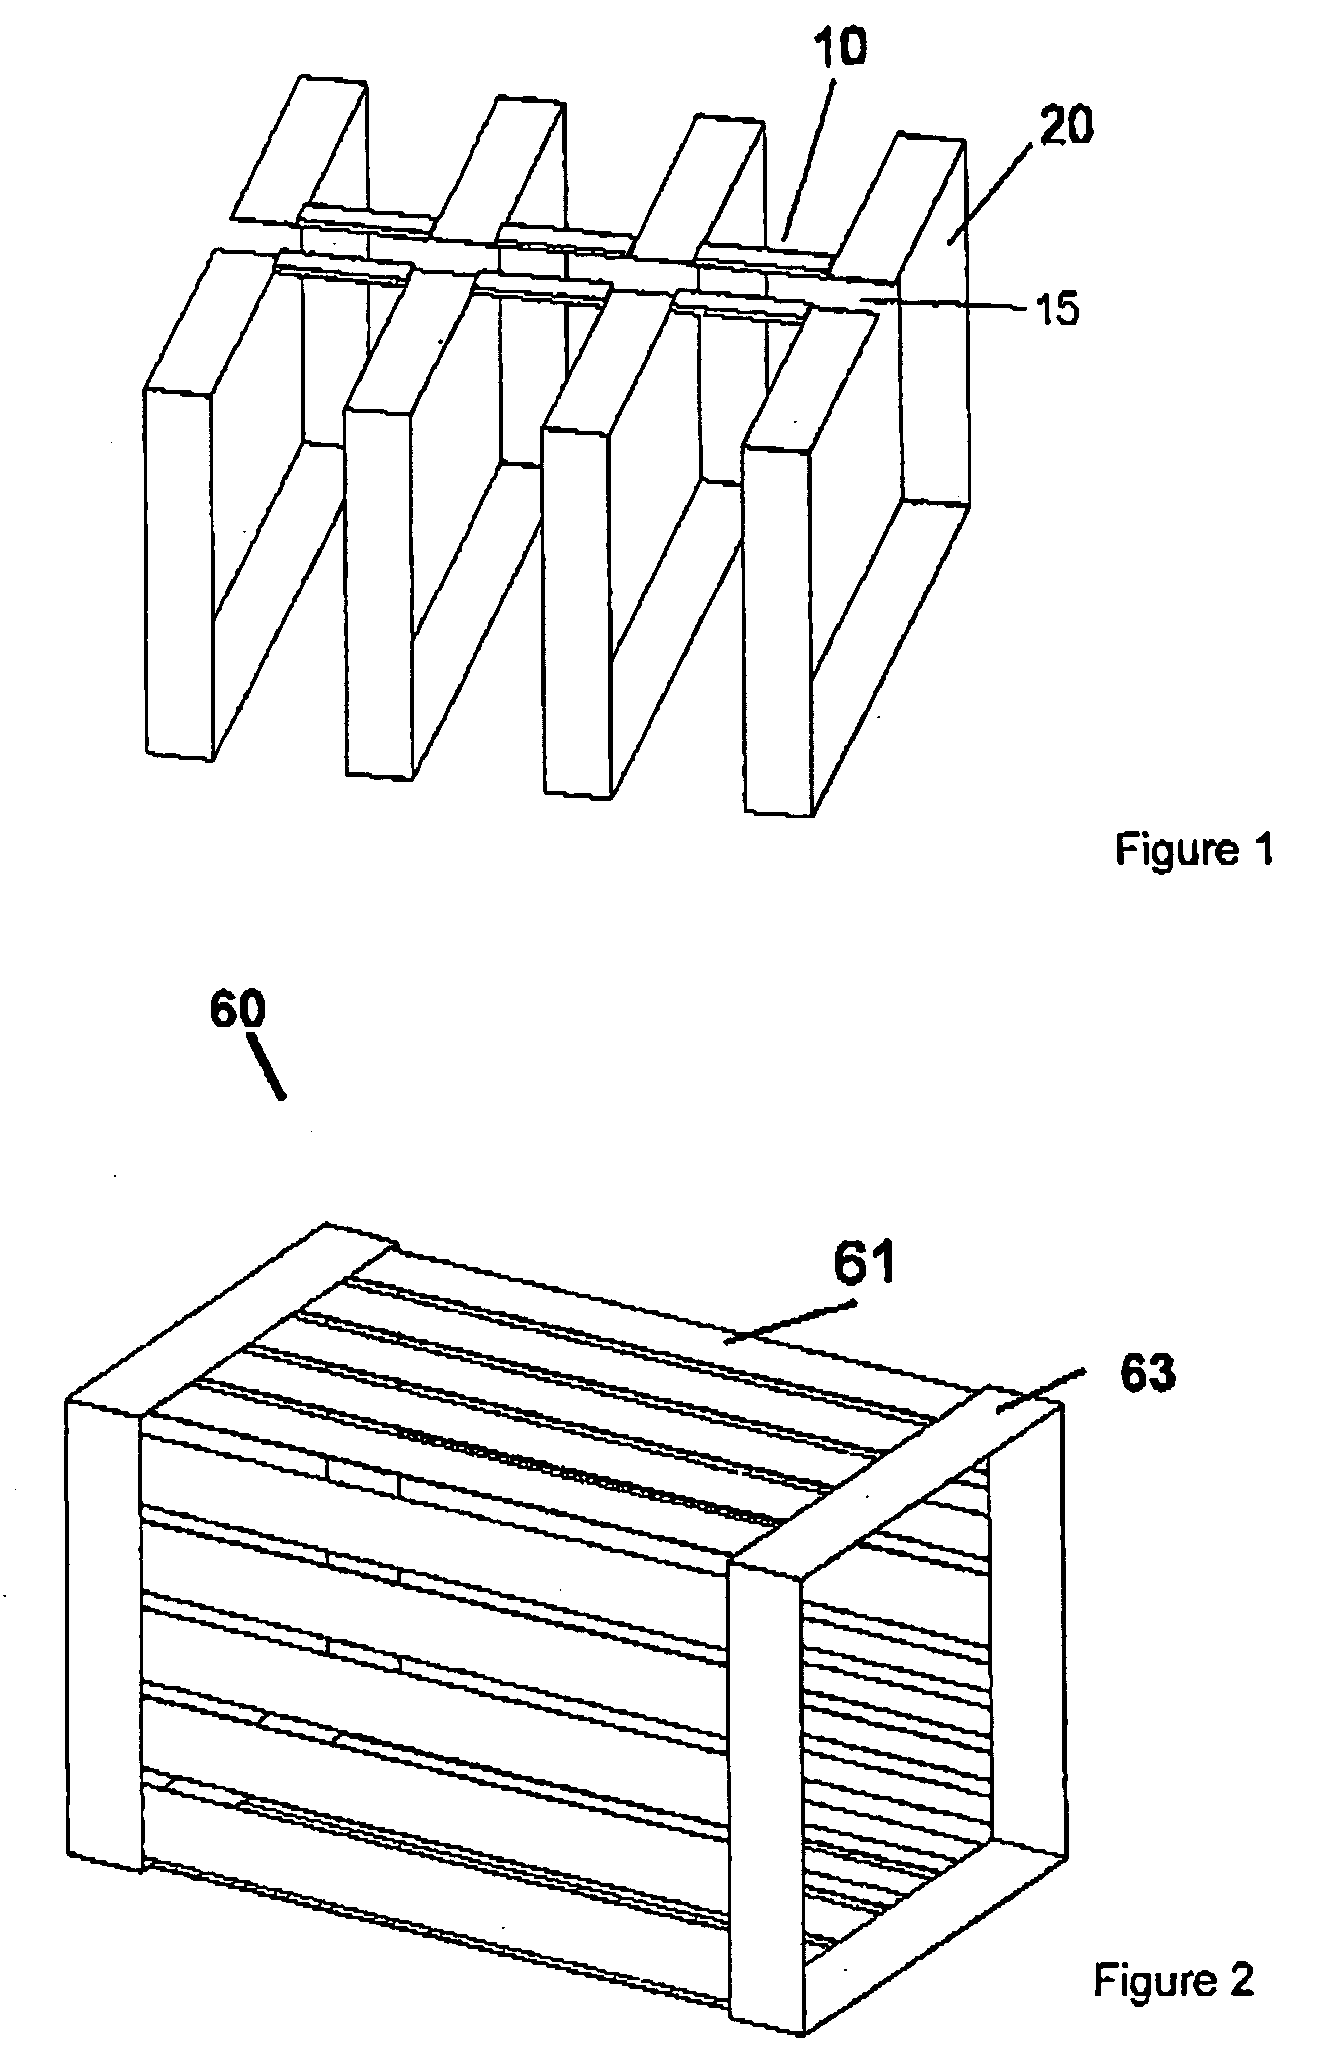 Transmit-receive coil system for nuclear quadrupole resonance signal detection in substances and components thereof